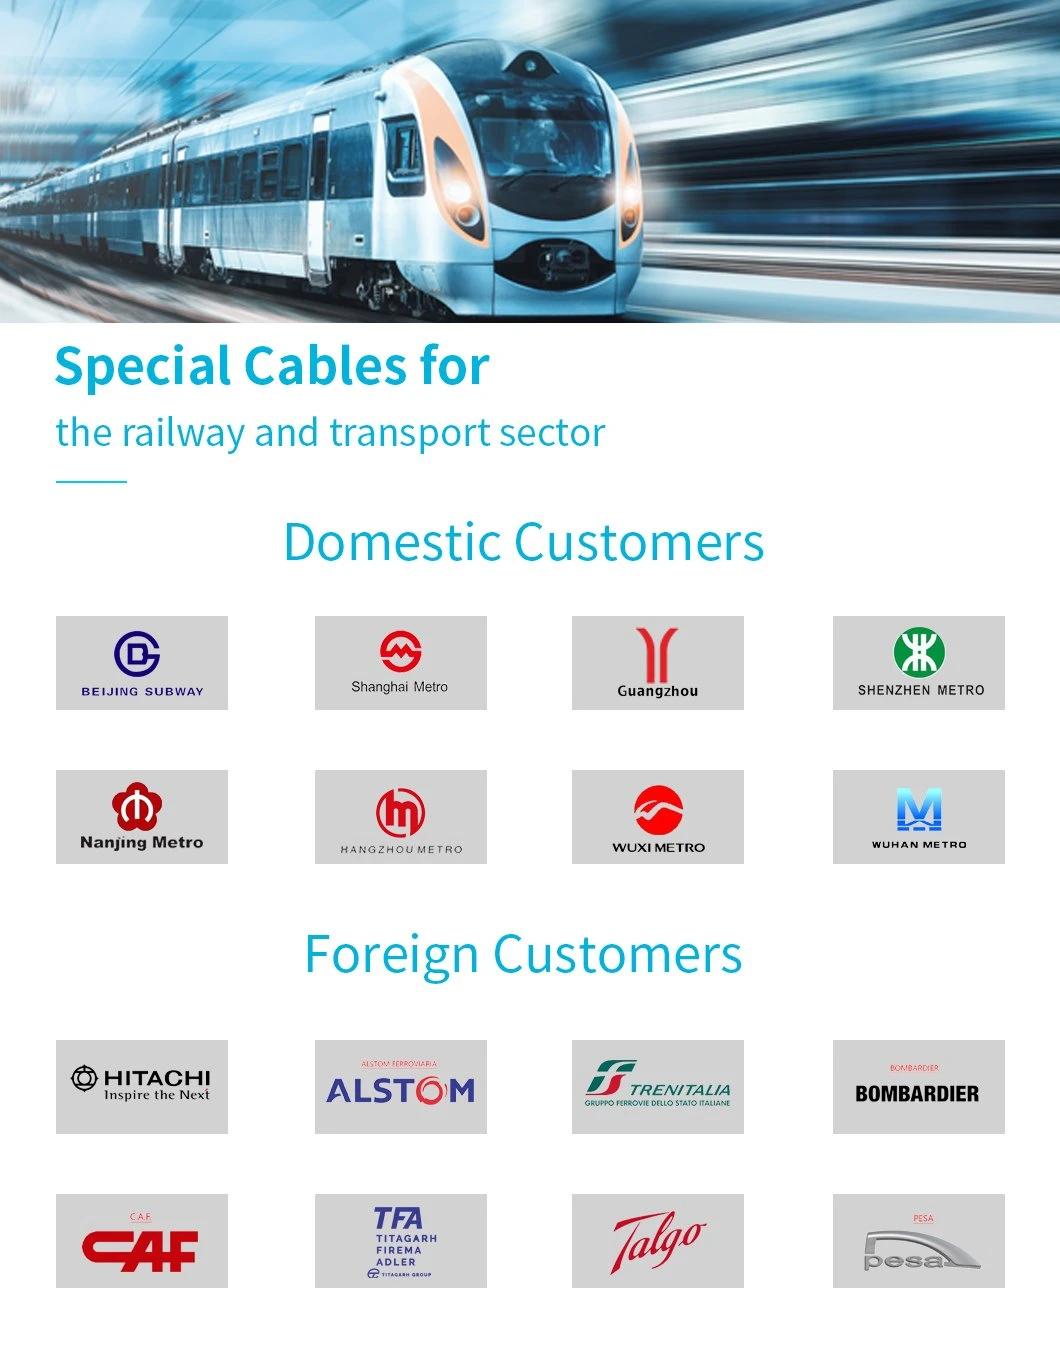 Min. 90% Shield Coverage Twisted Pair Network Cables for High-Speed Railways and Subways